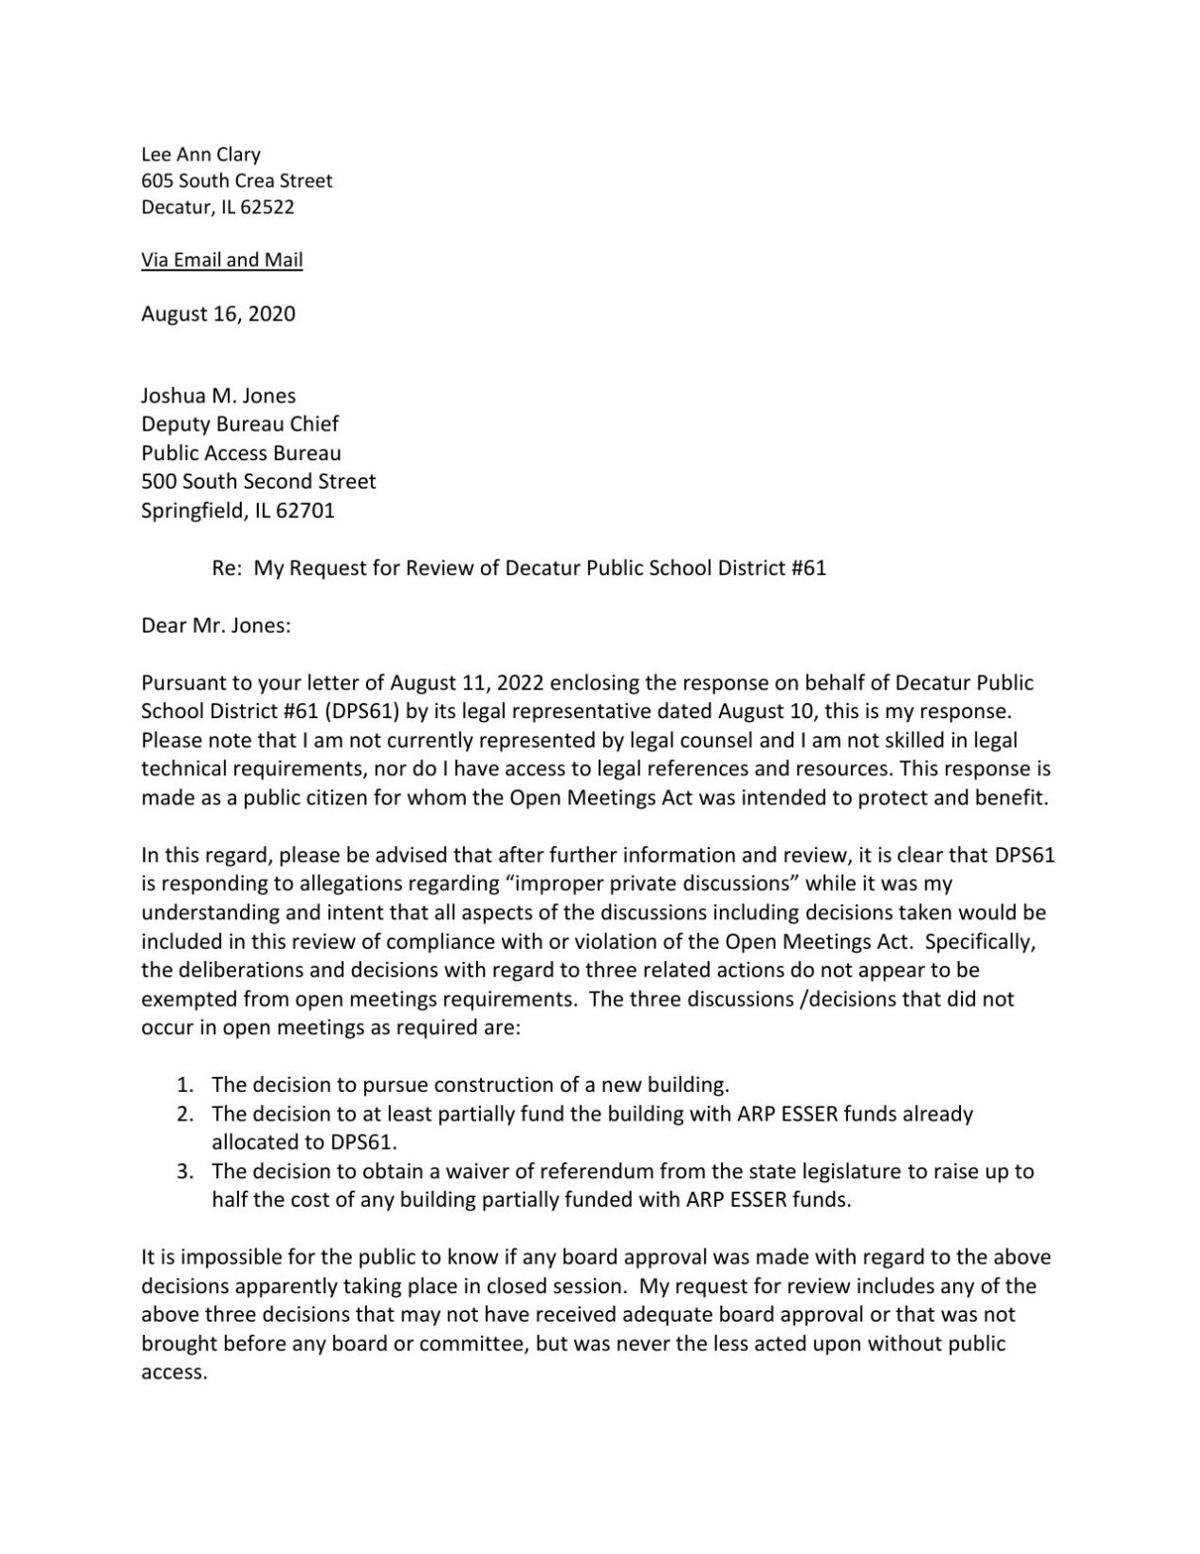 DOCUMENT: Read Lee Ann Clary's response DPS 61 reply to Public Access Bureau